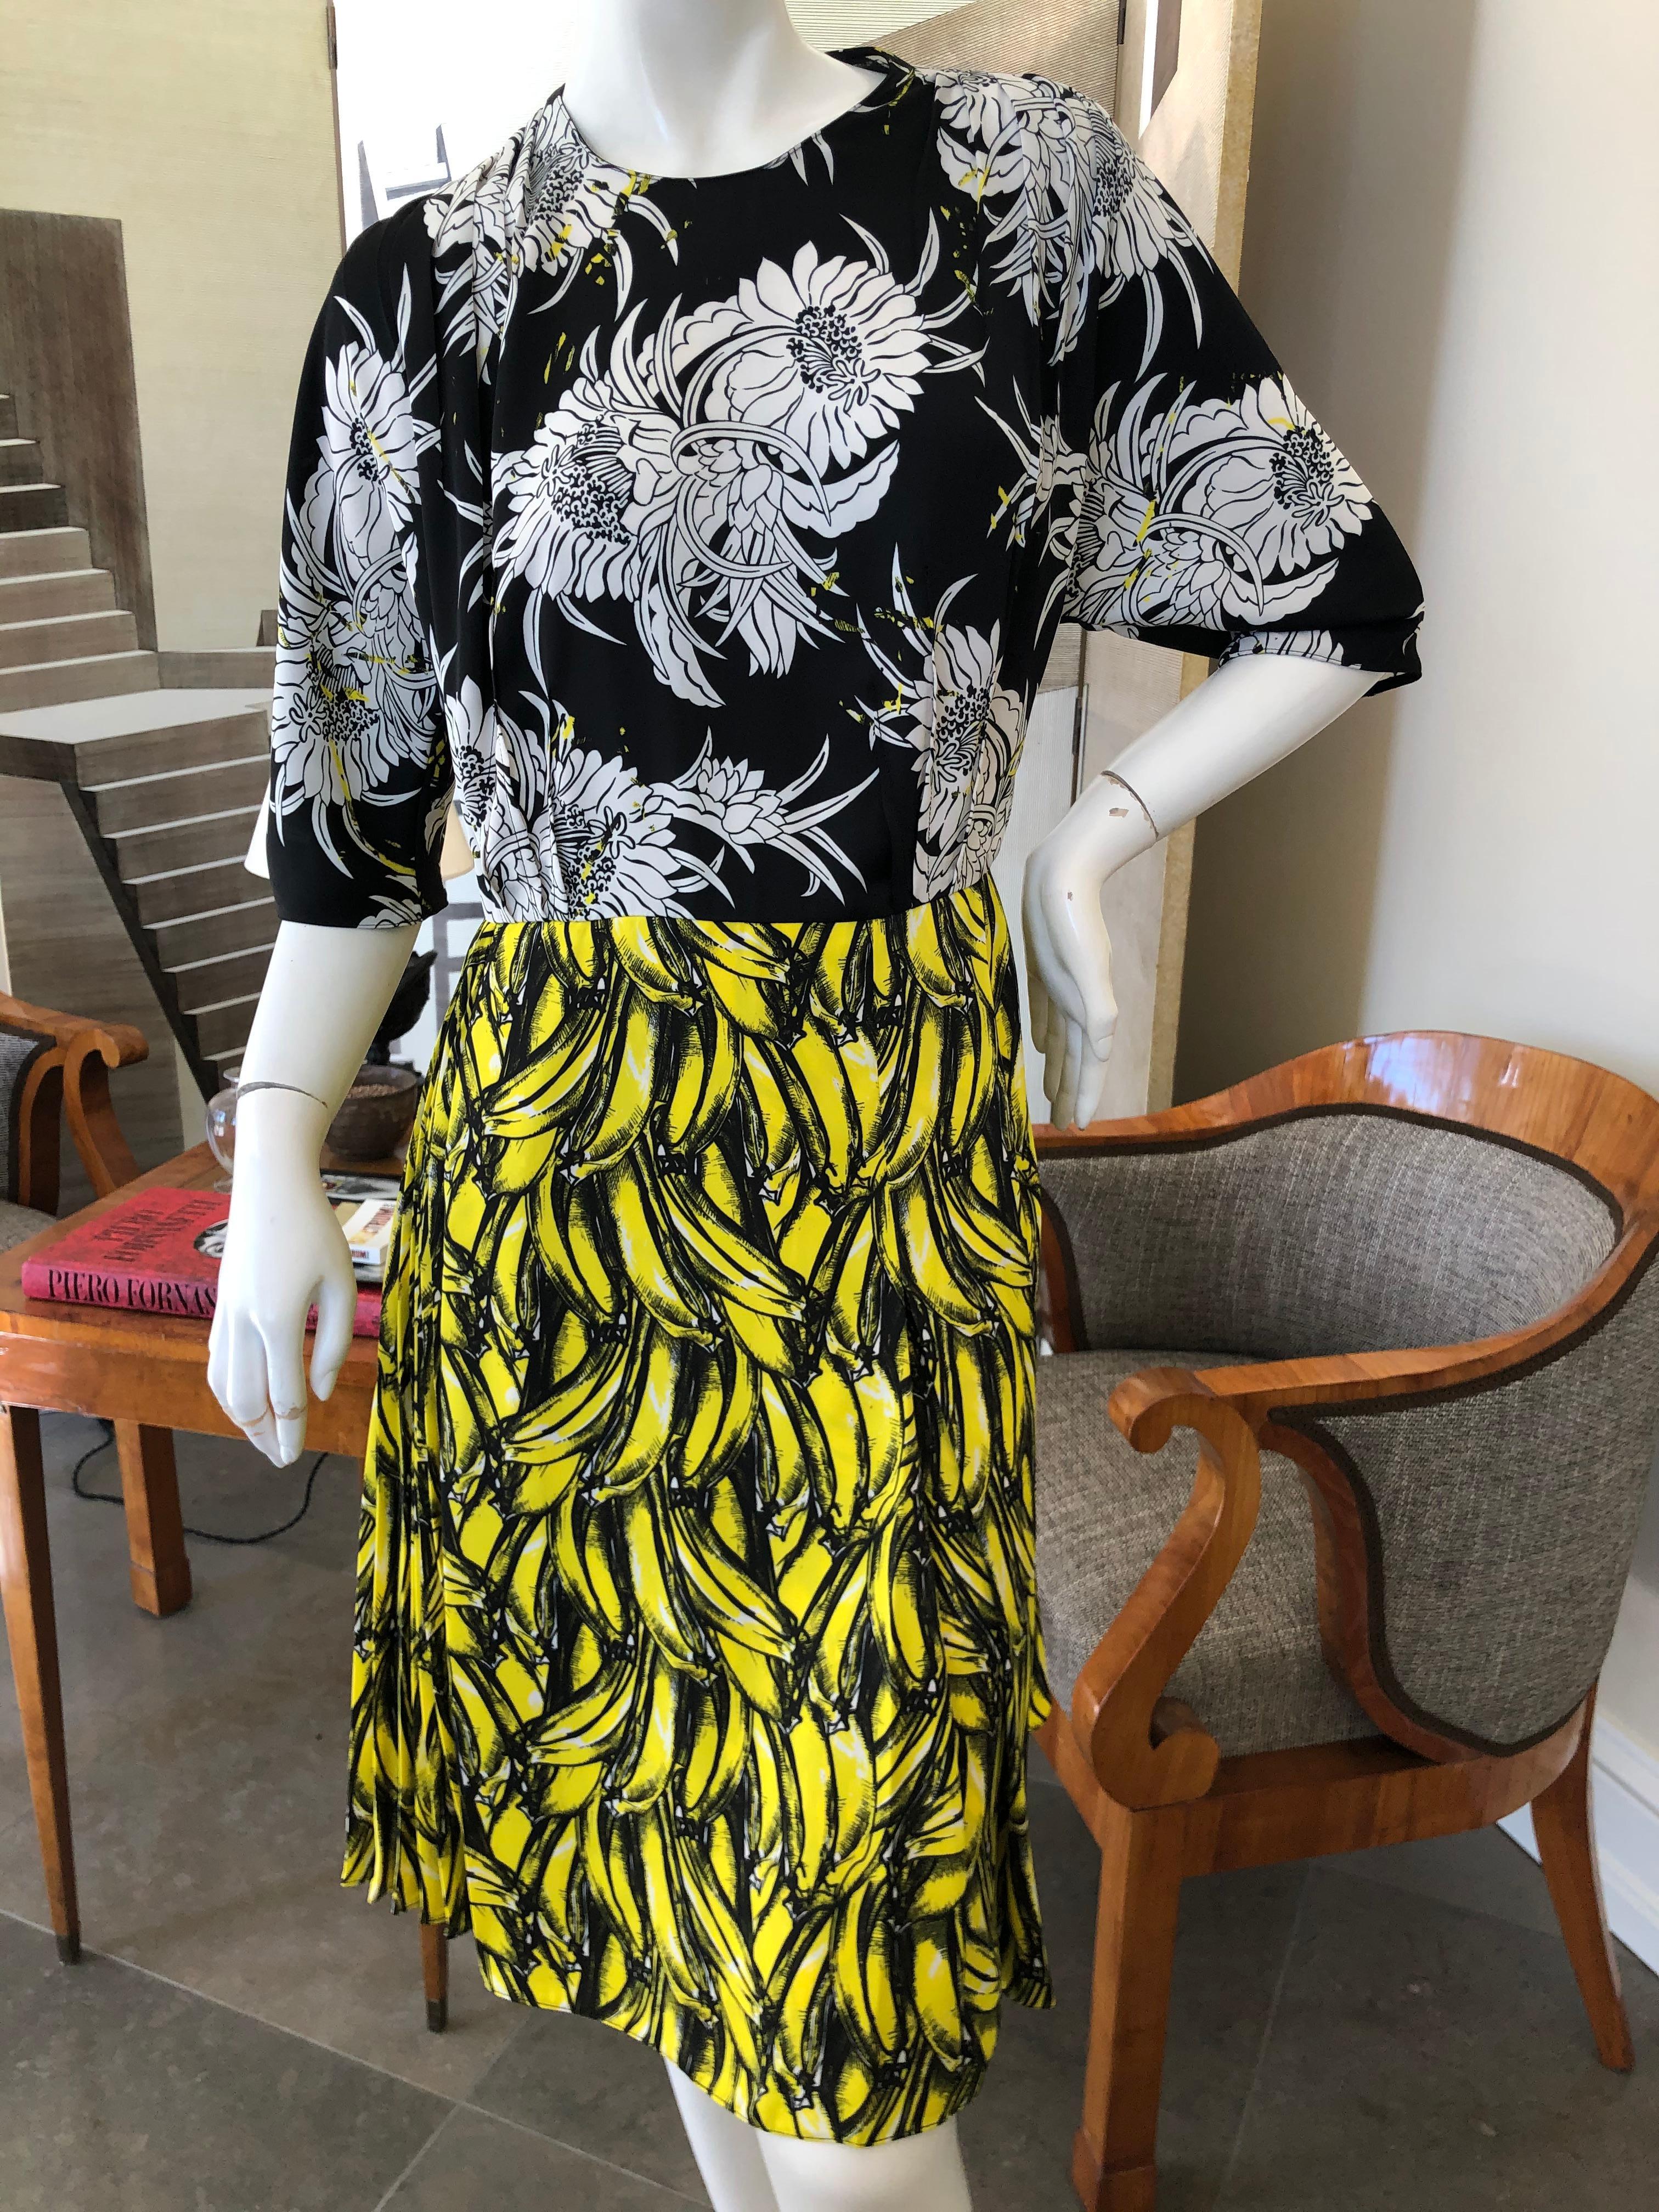 Prada Banana and Dahlia Print Dress with Pleated Accents A/W 2018.
There is no size tag, appx Size 42-44
Bust 38